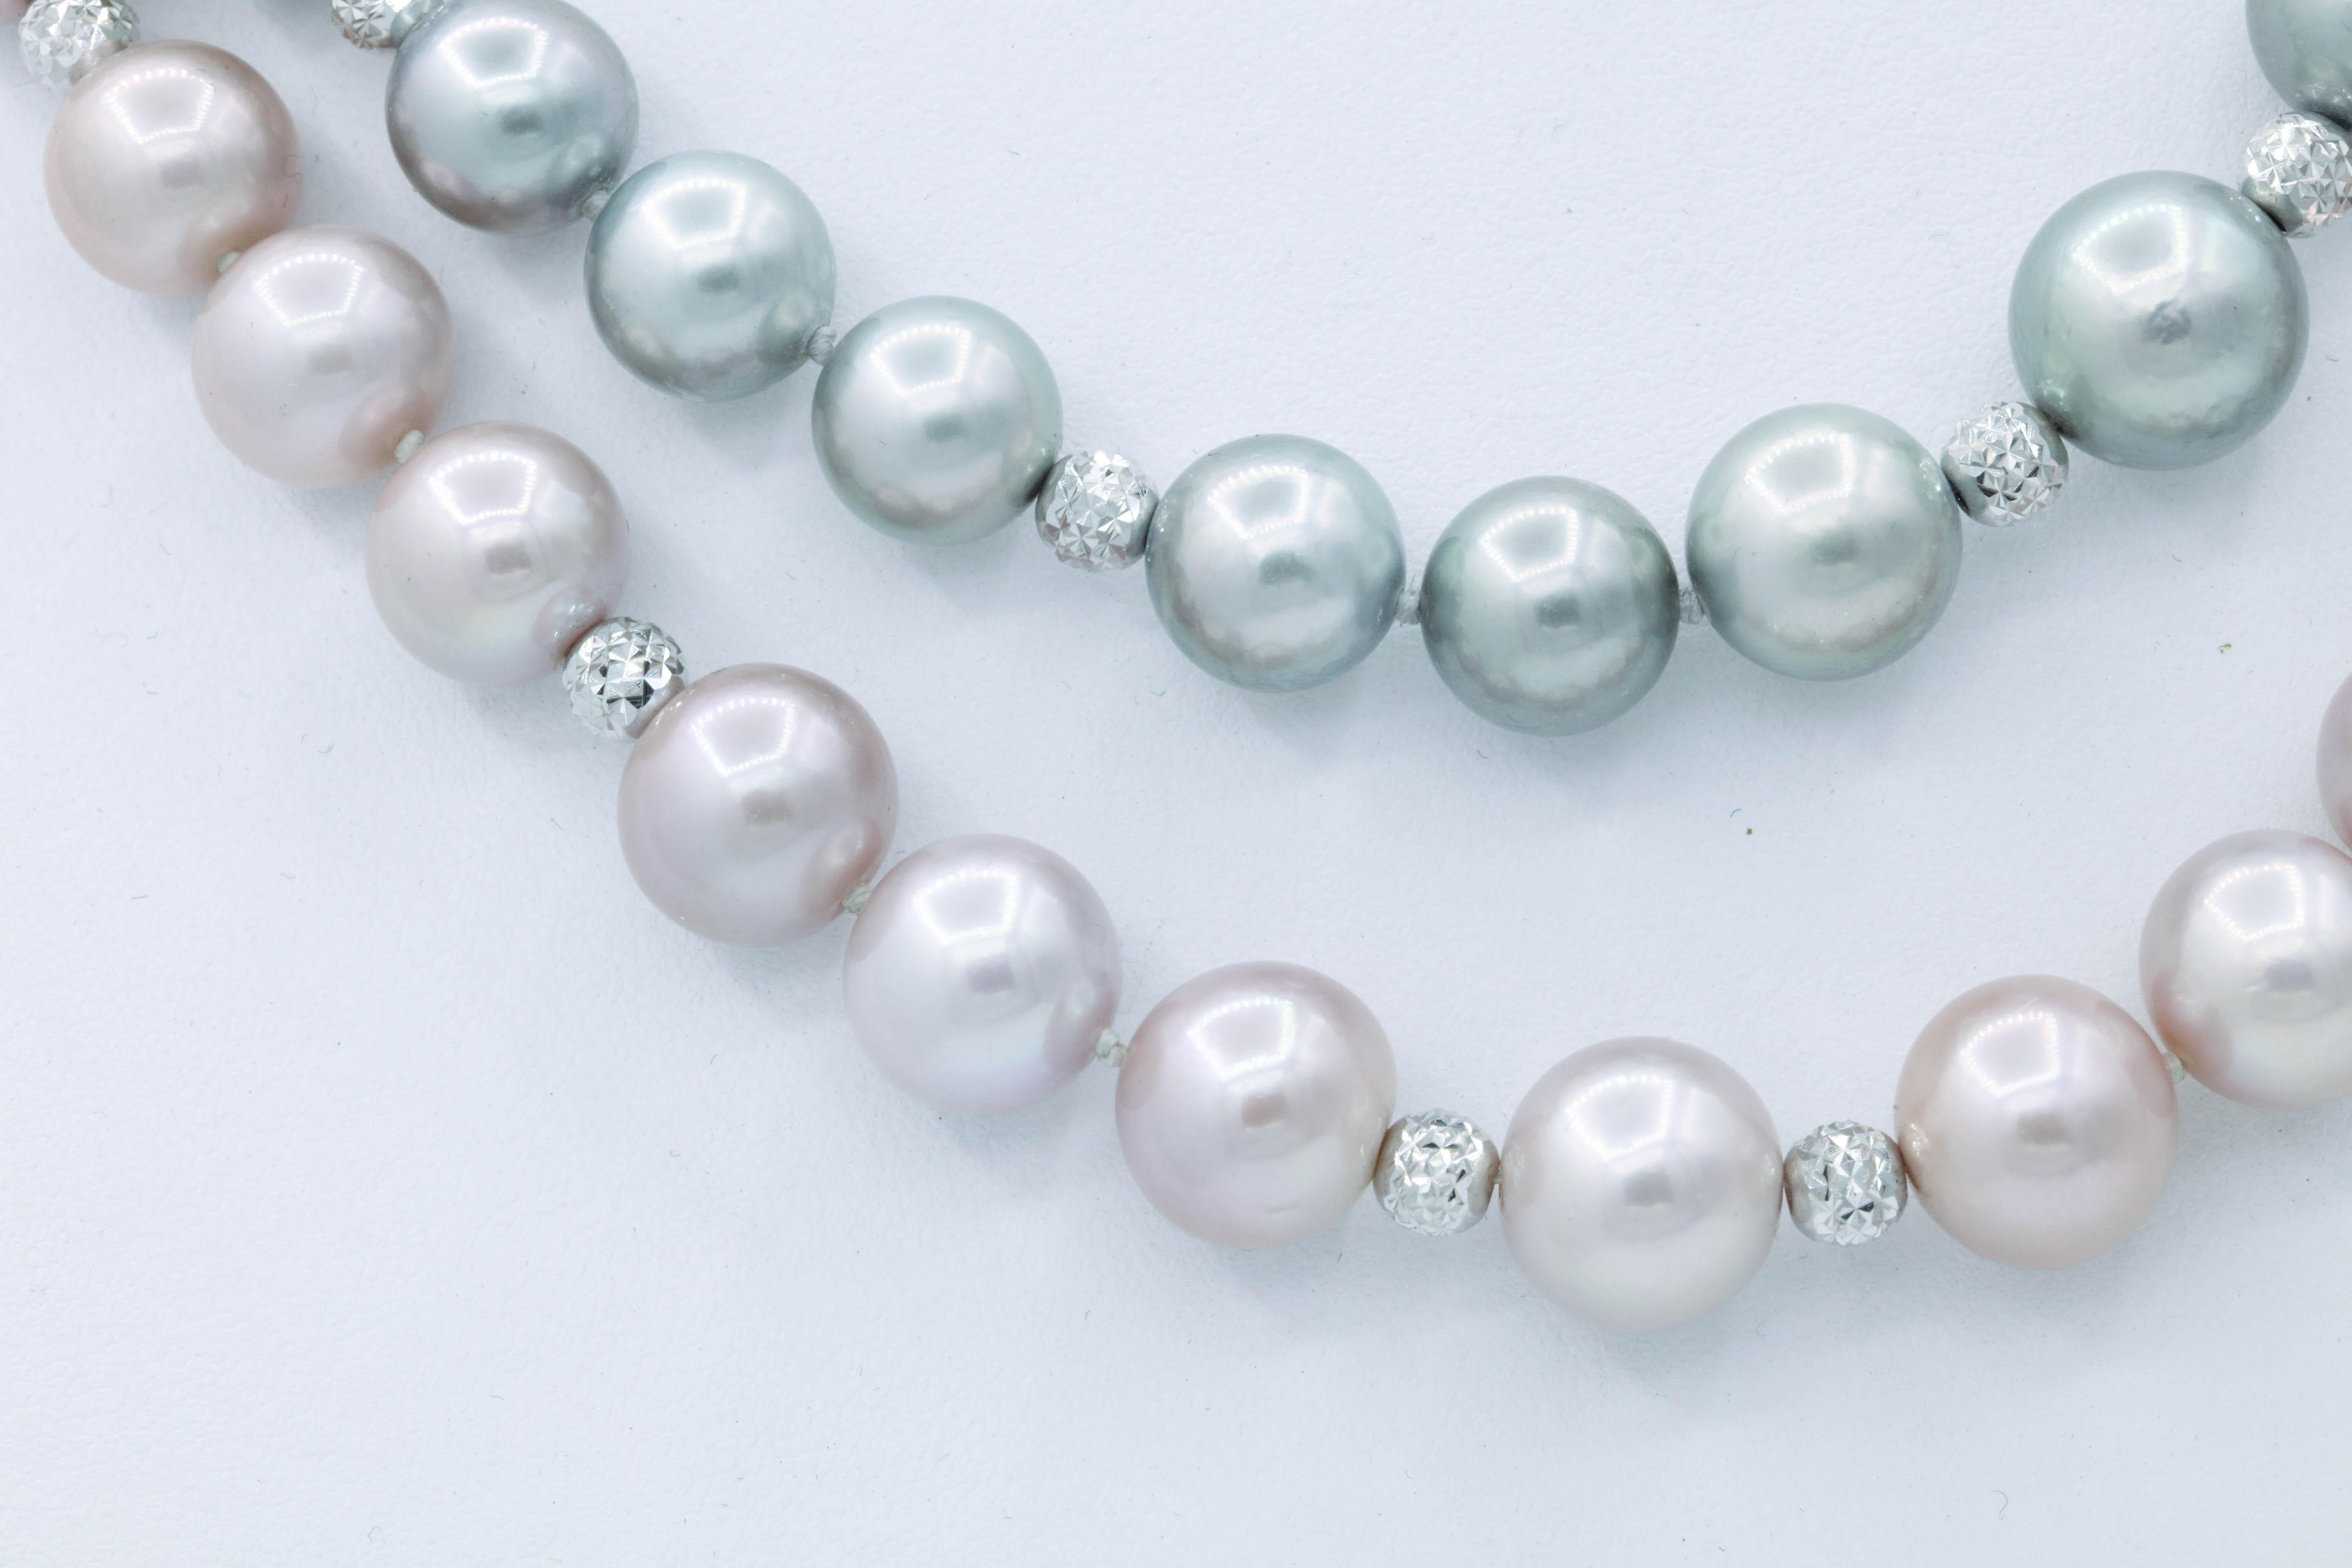 18K White Diamond cut  Gold 
Cultured pearls 9.0 - 11.8 mm
This necklace can be used as one that will measures 35